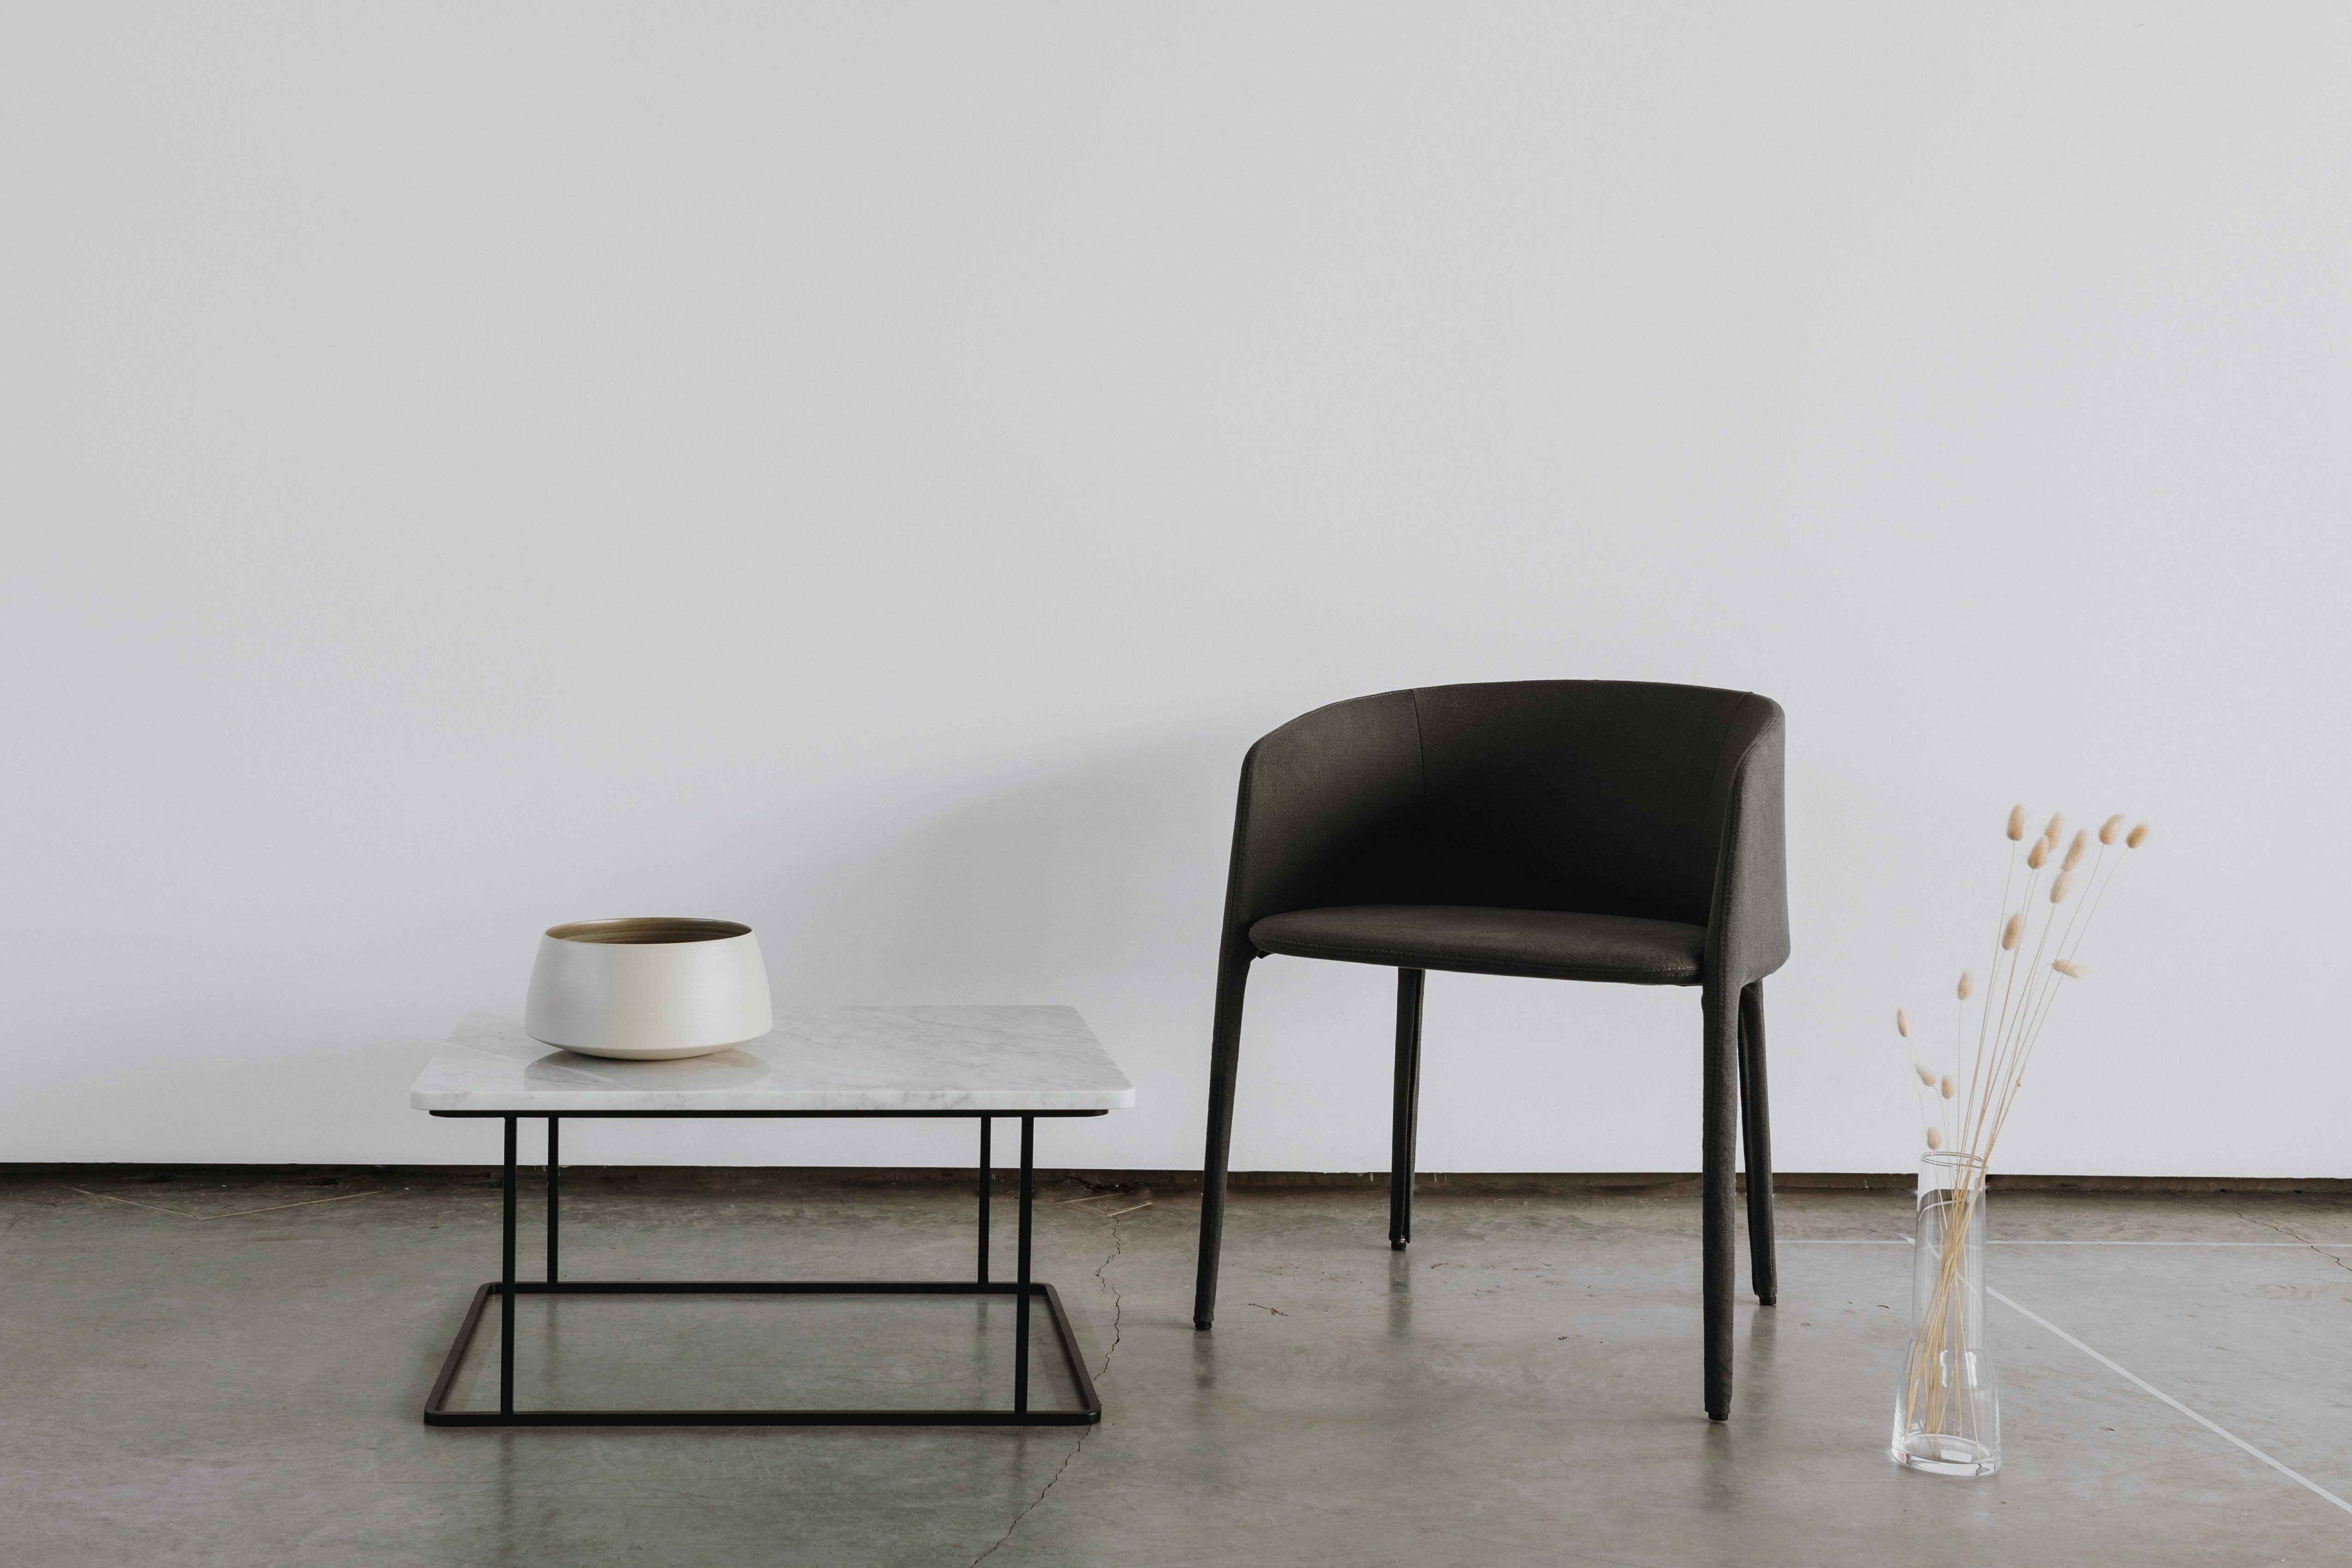 FORM-B is one of the 3 coffee tables in the FORM collection. The top is made of light-coloured Carrara marble, and it is placed directly on a powder-coated steel frame. The entire table – both the top and the steel base – is rounded because it was